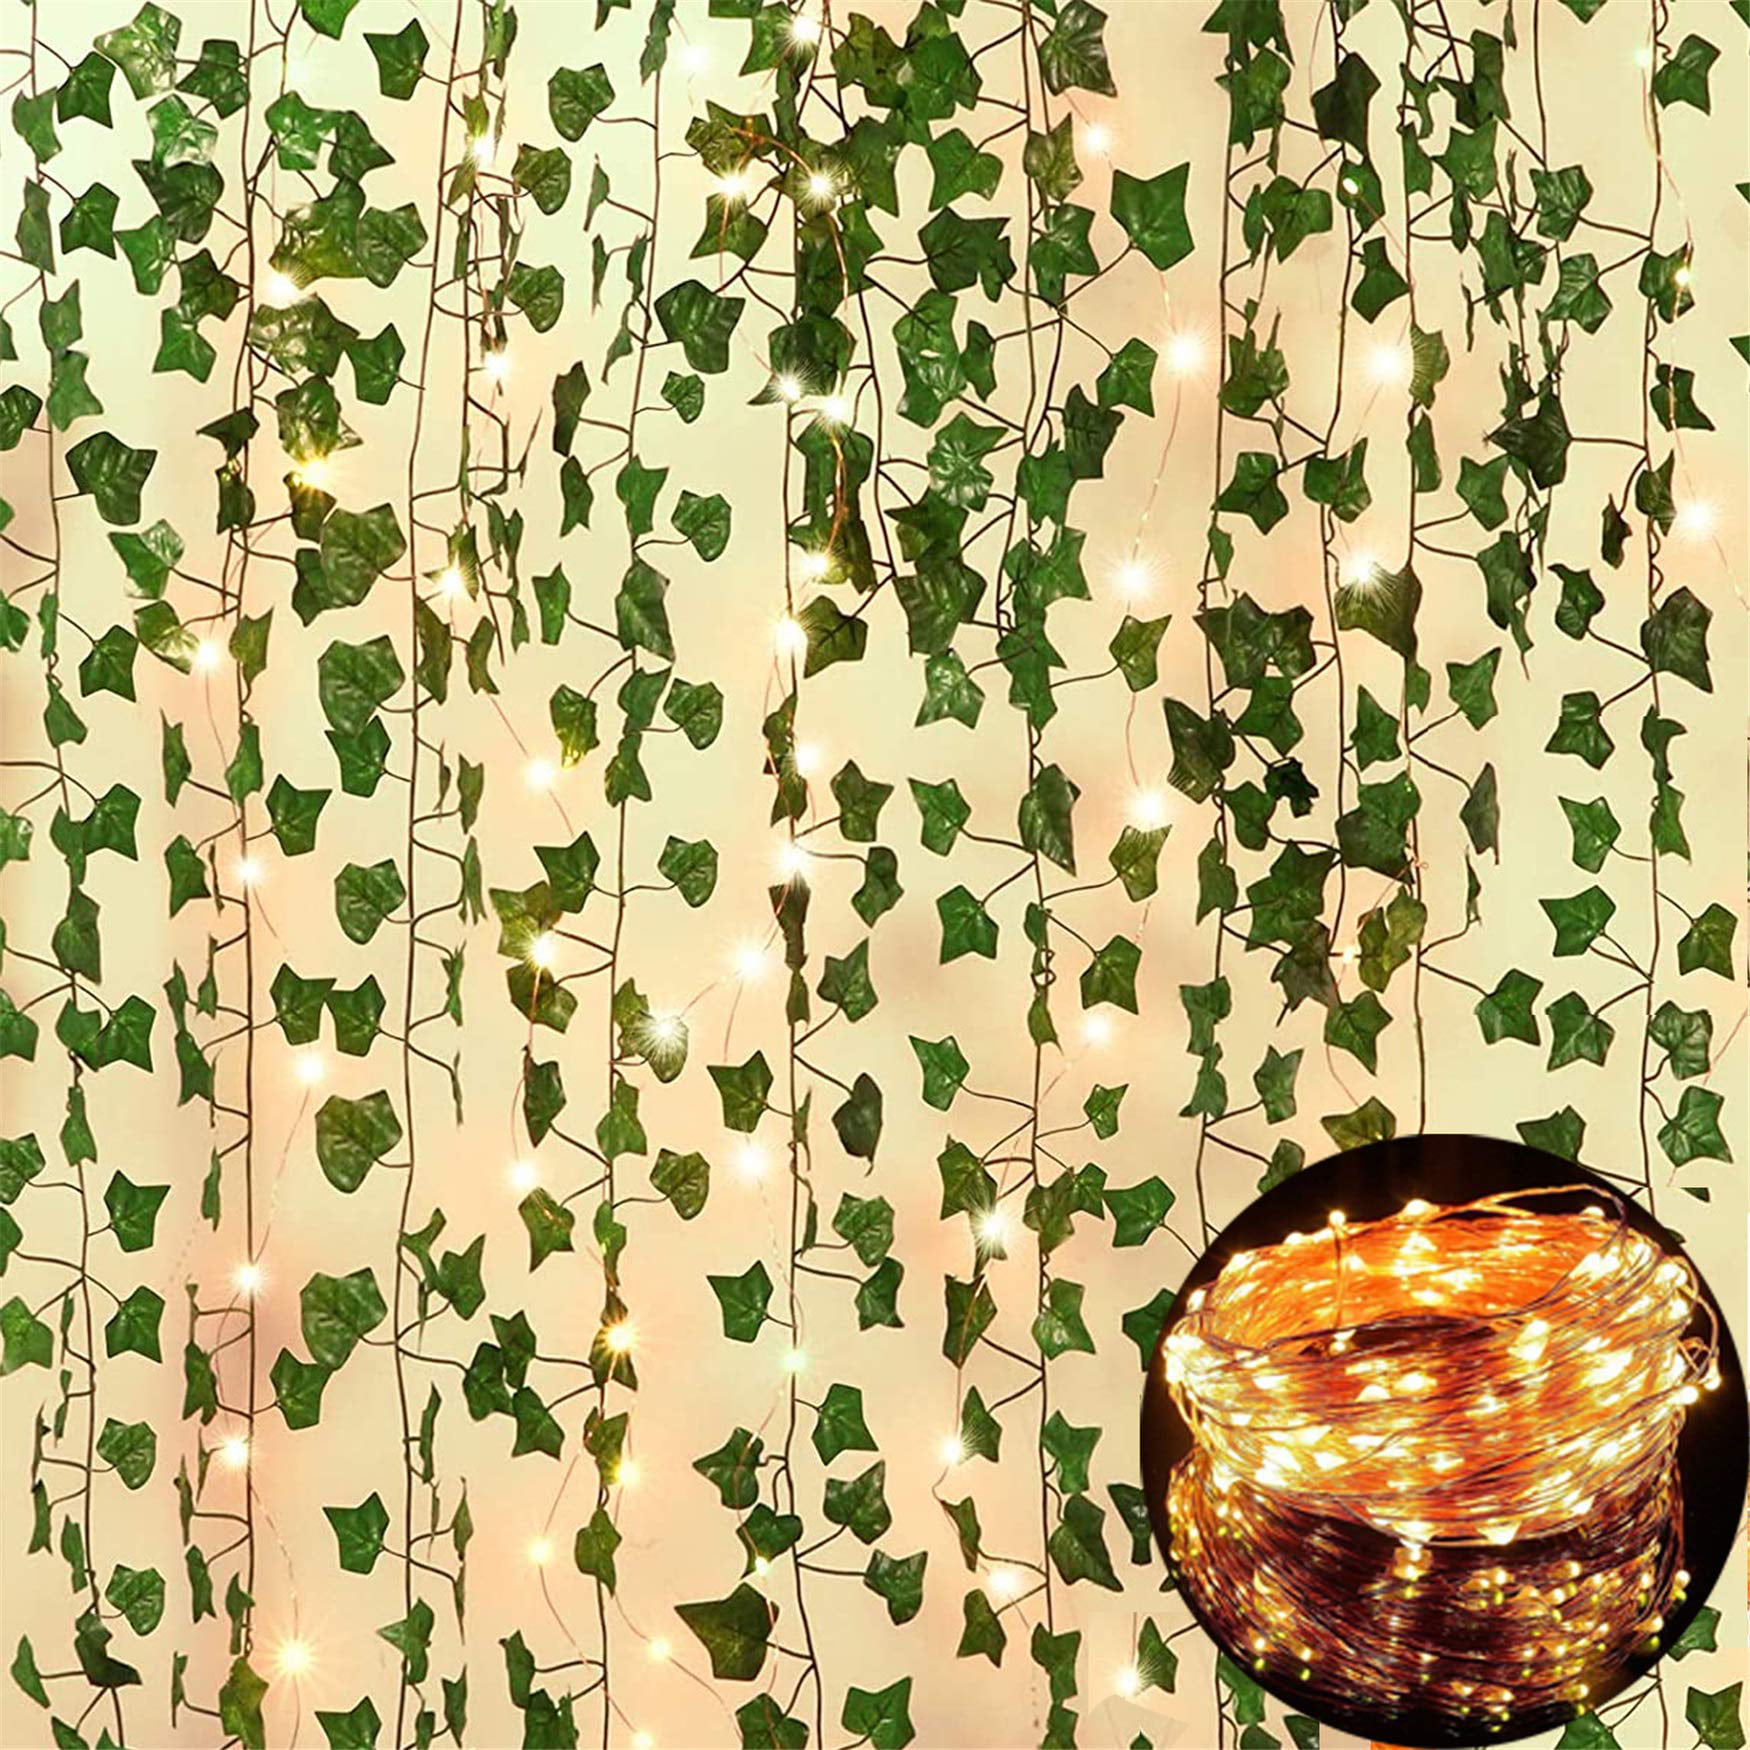 Home Decor Wall Hanging Garland Plants Artificial Ivy Leaves Vine Fake Foliage 